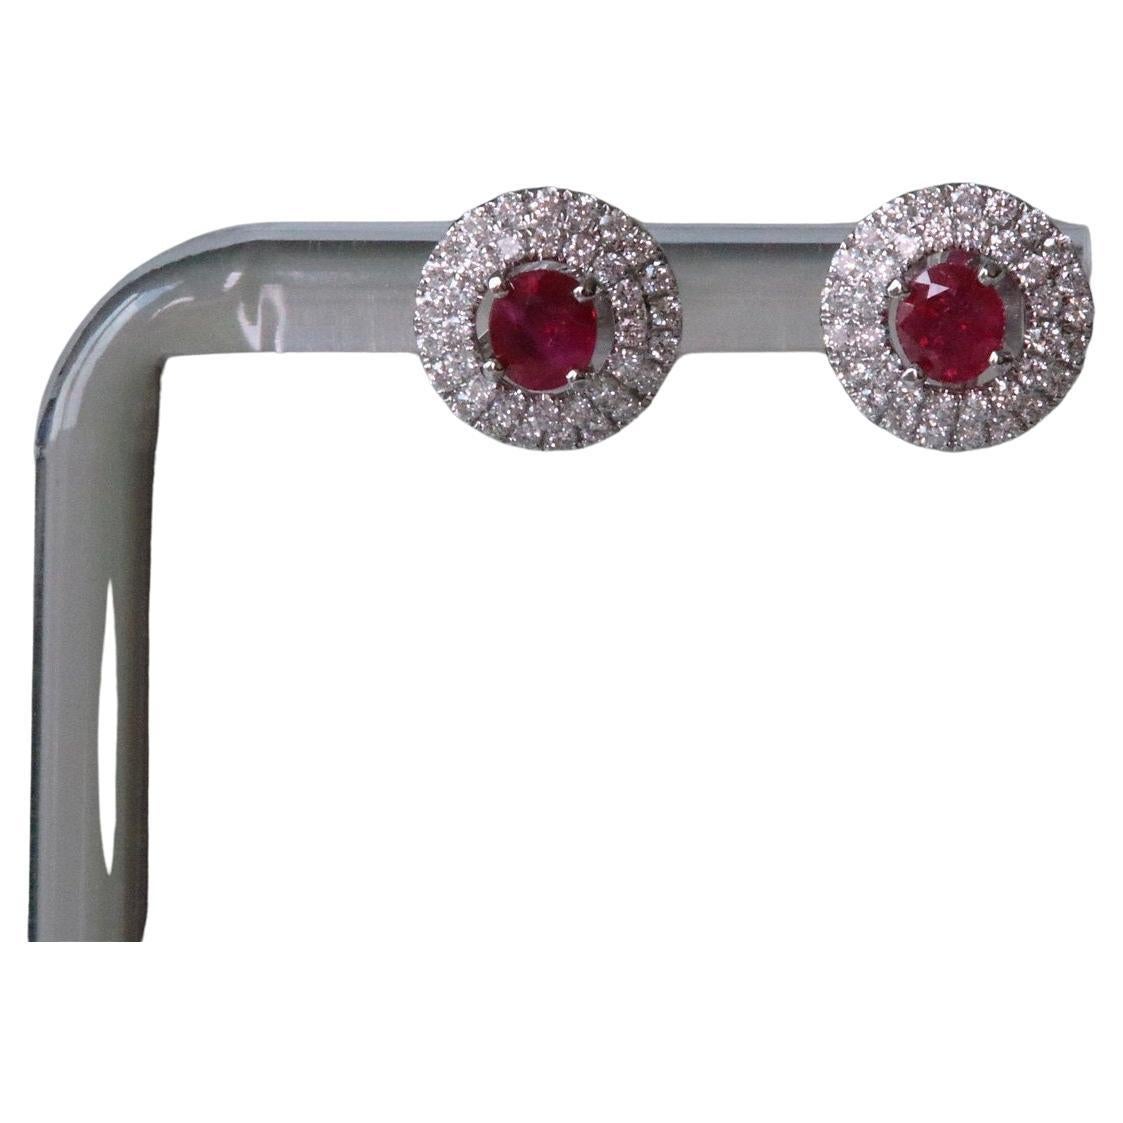 Rubies that are completely untreated are worth far more than those that have been treated. Geographical origin also has a major impact on price.

The rubies are from Burma and completely untreated or altered in any way. They exhibit eye-clean